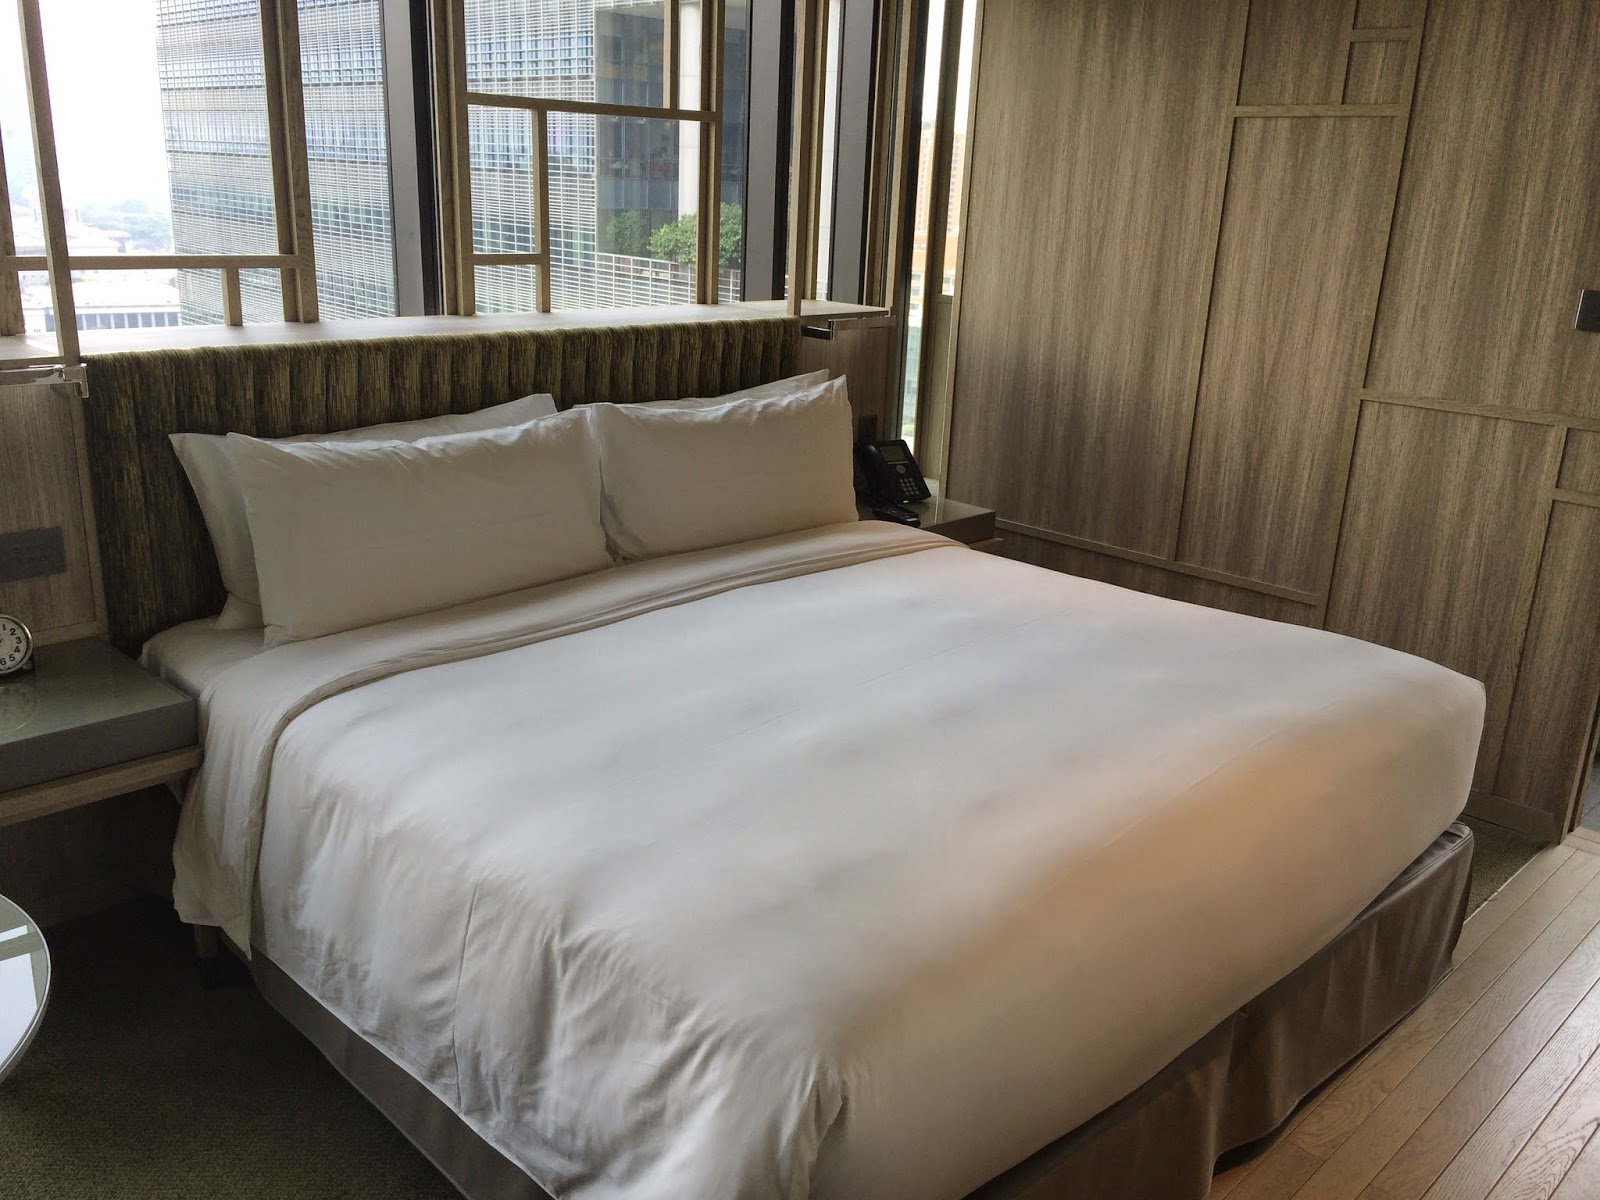 Park Royal Pickering, Orchid Club Premier Room - Singapore - Travel is ...